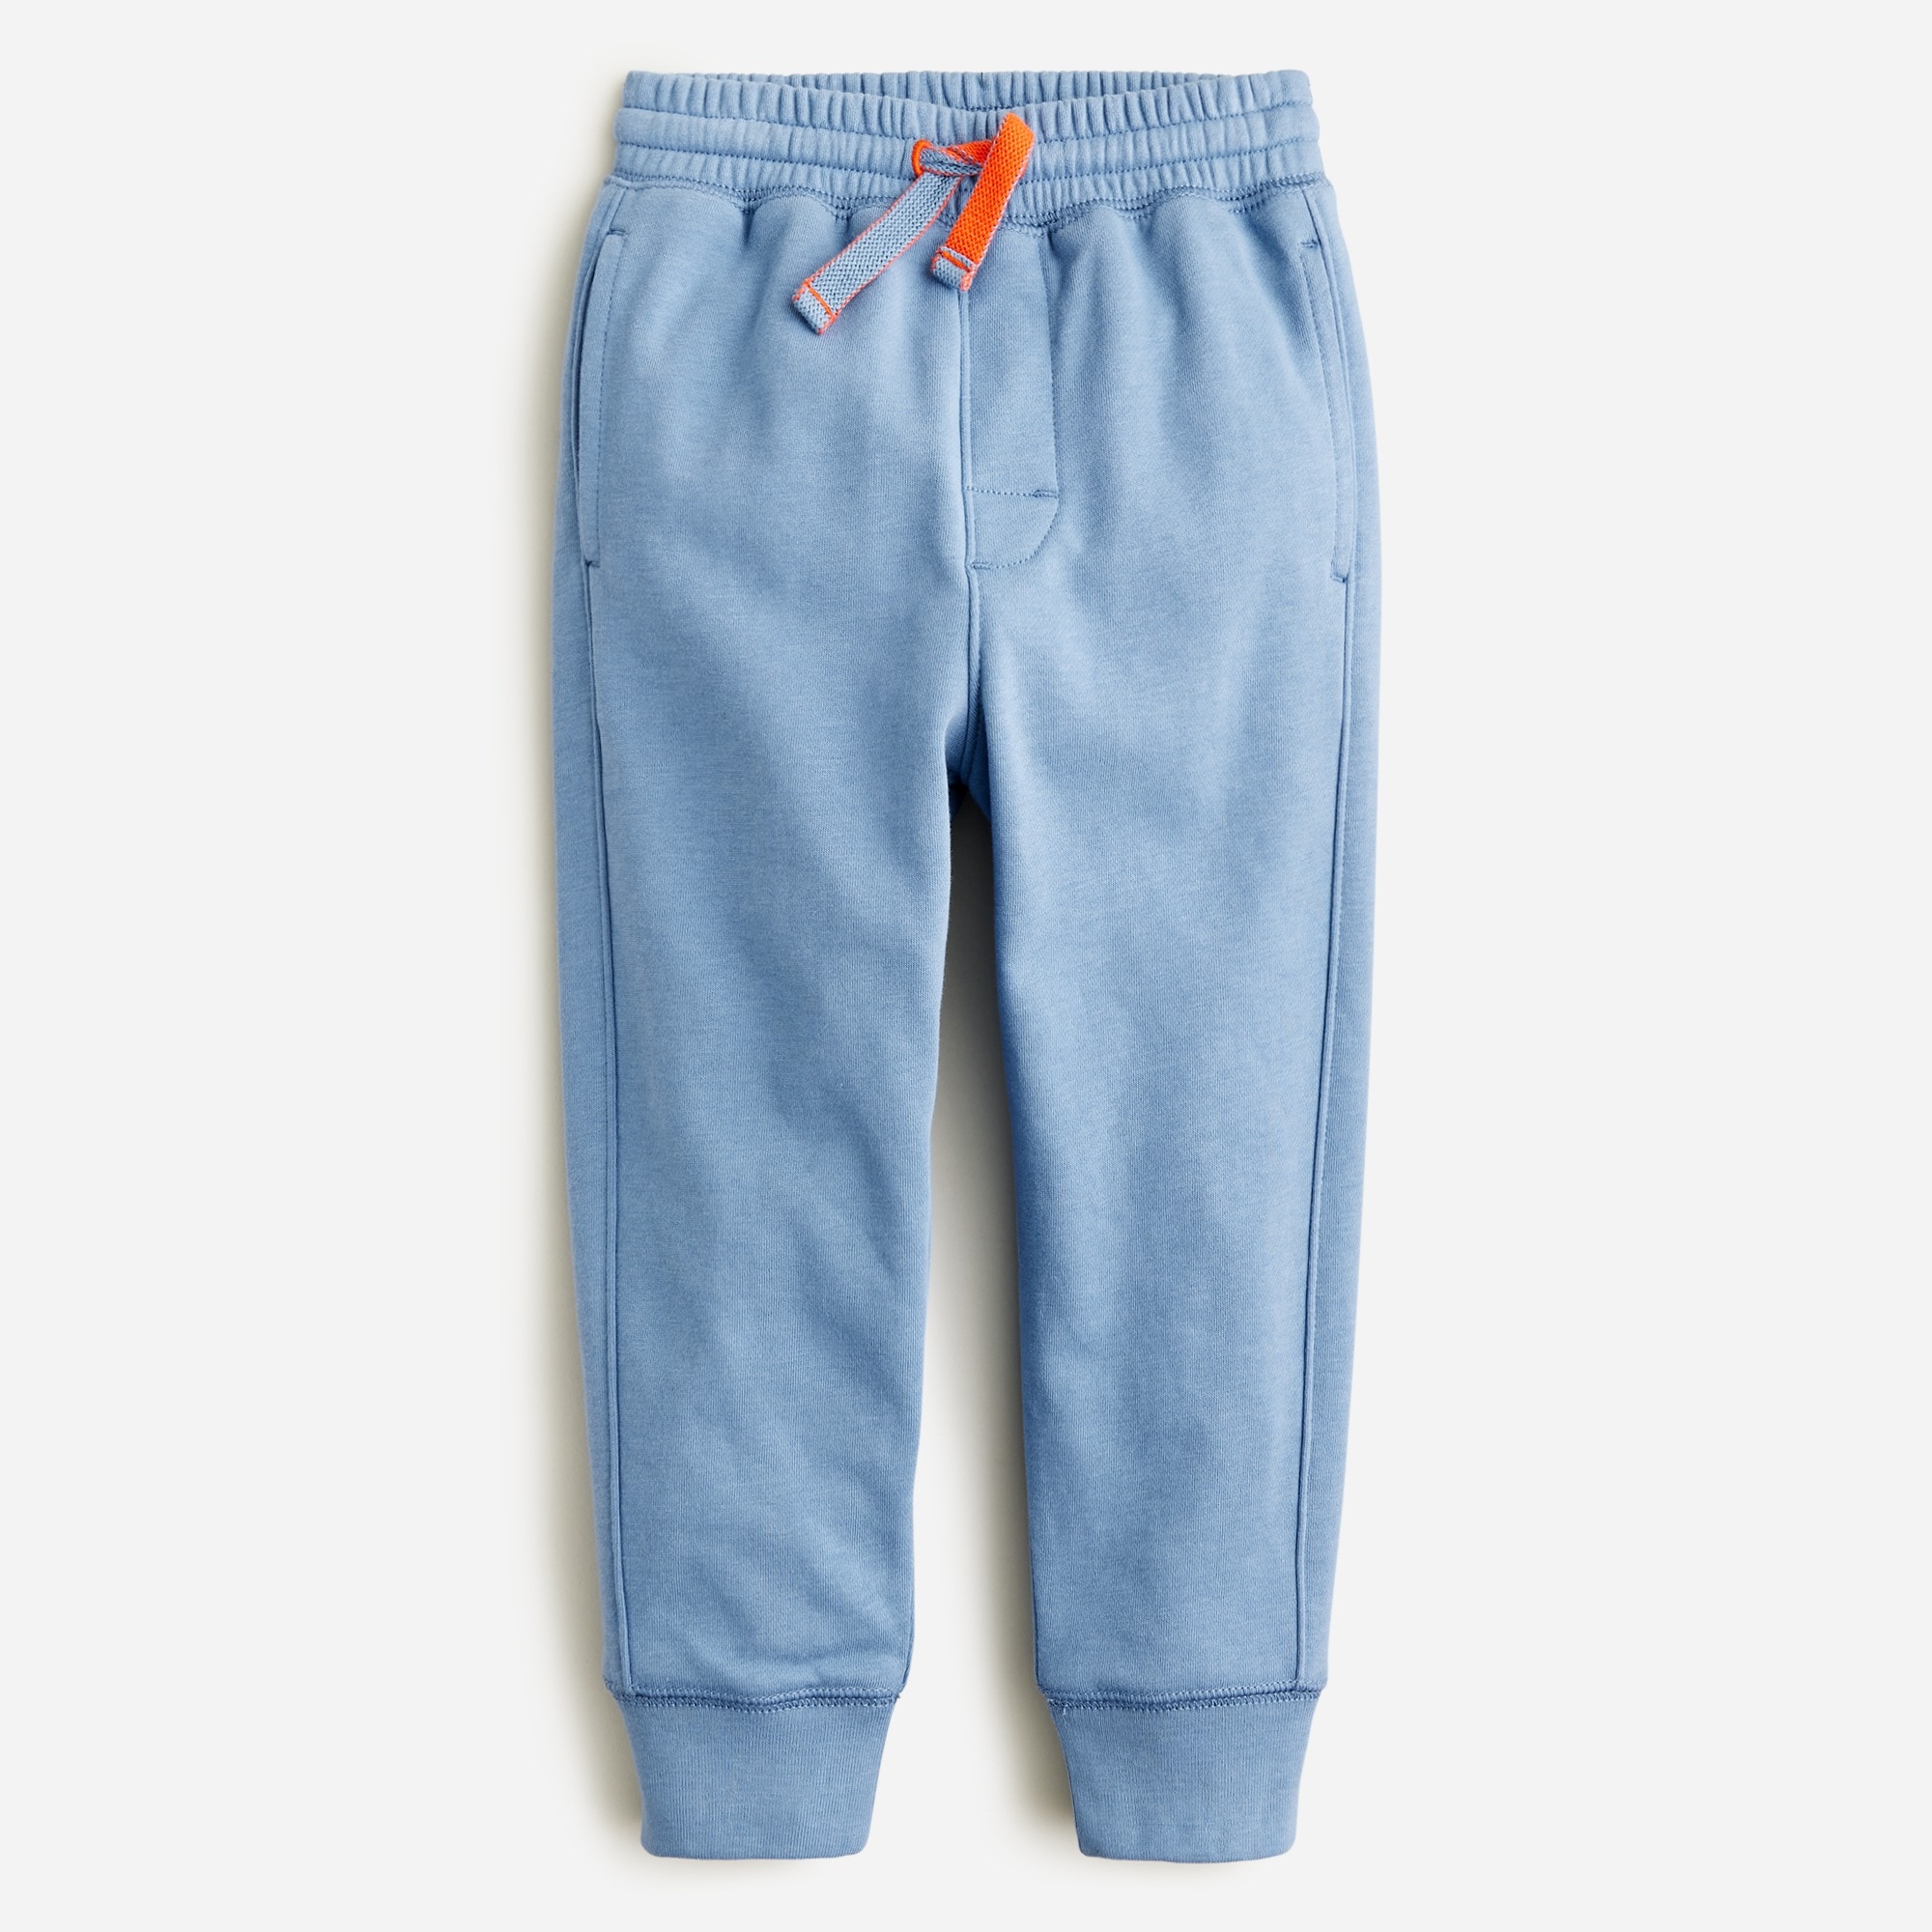  Kids' slim-slouchy jogger pant in terry